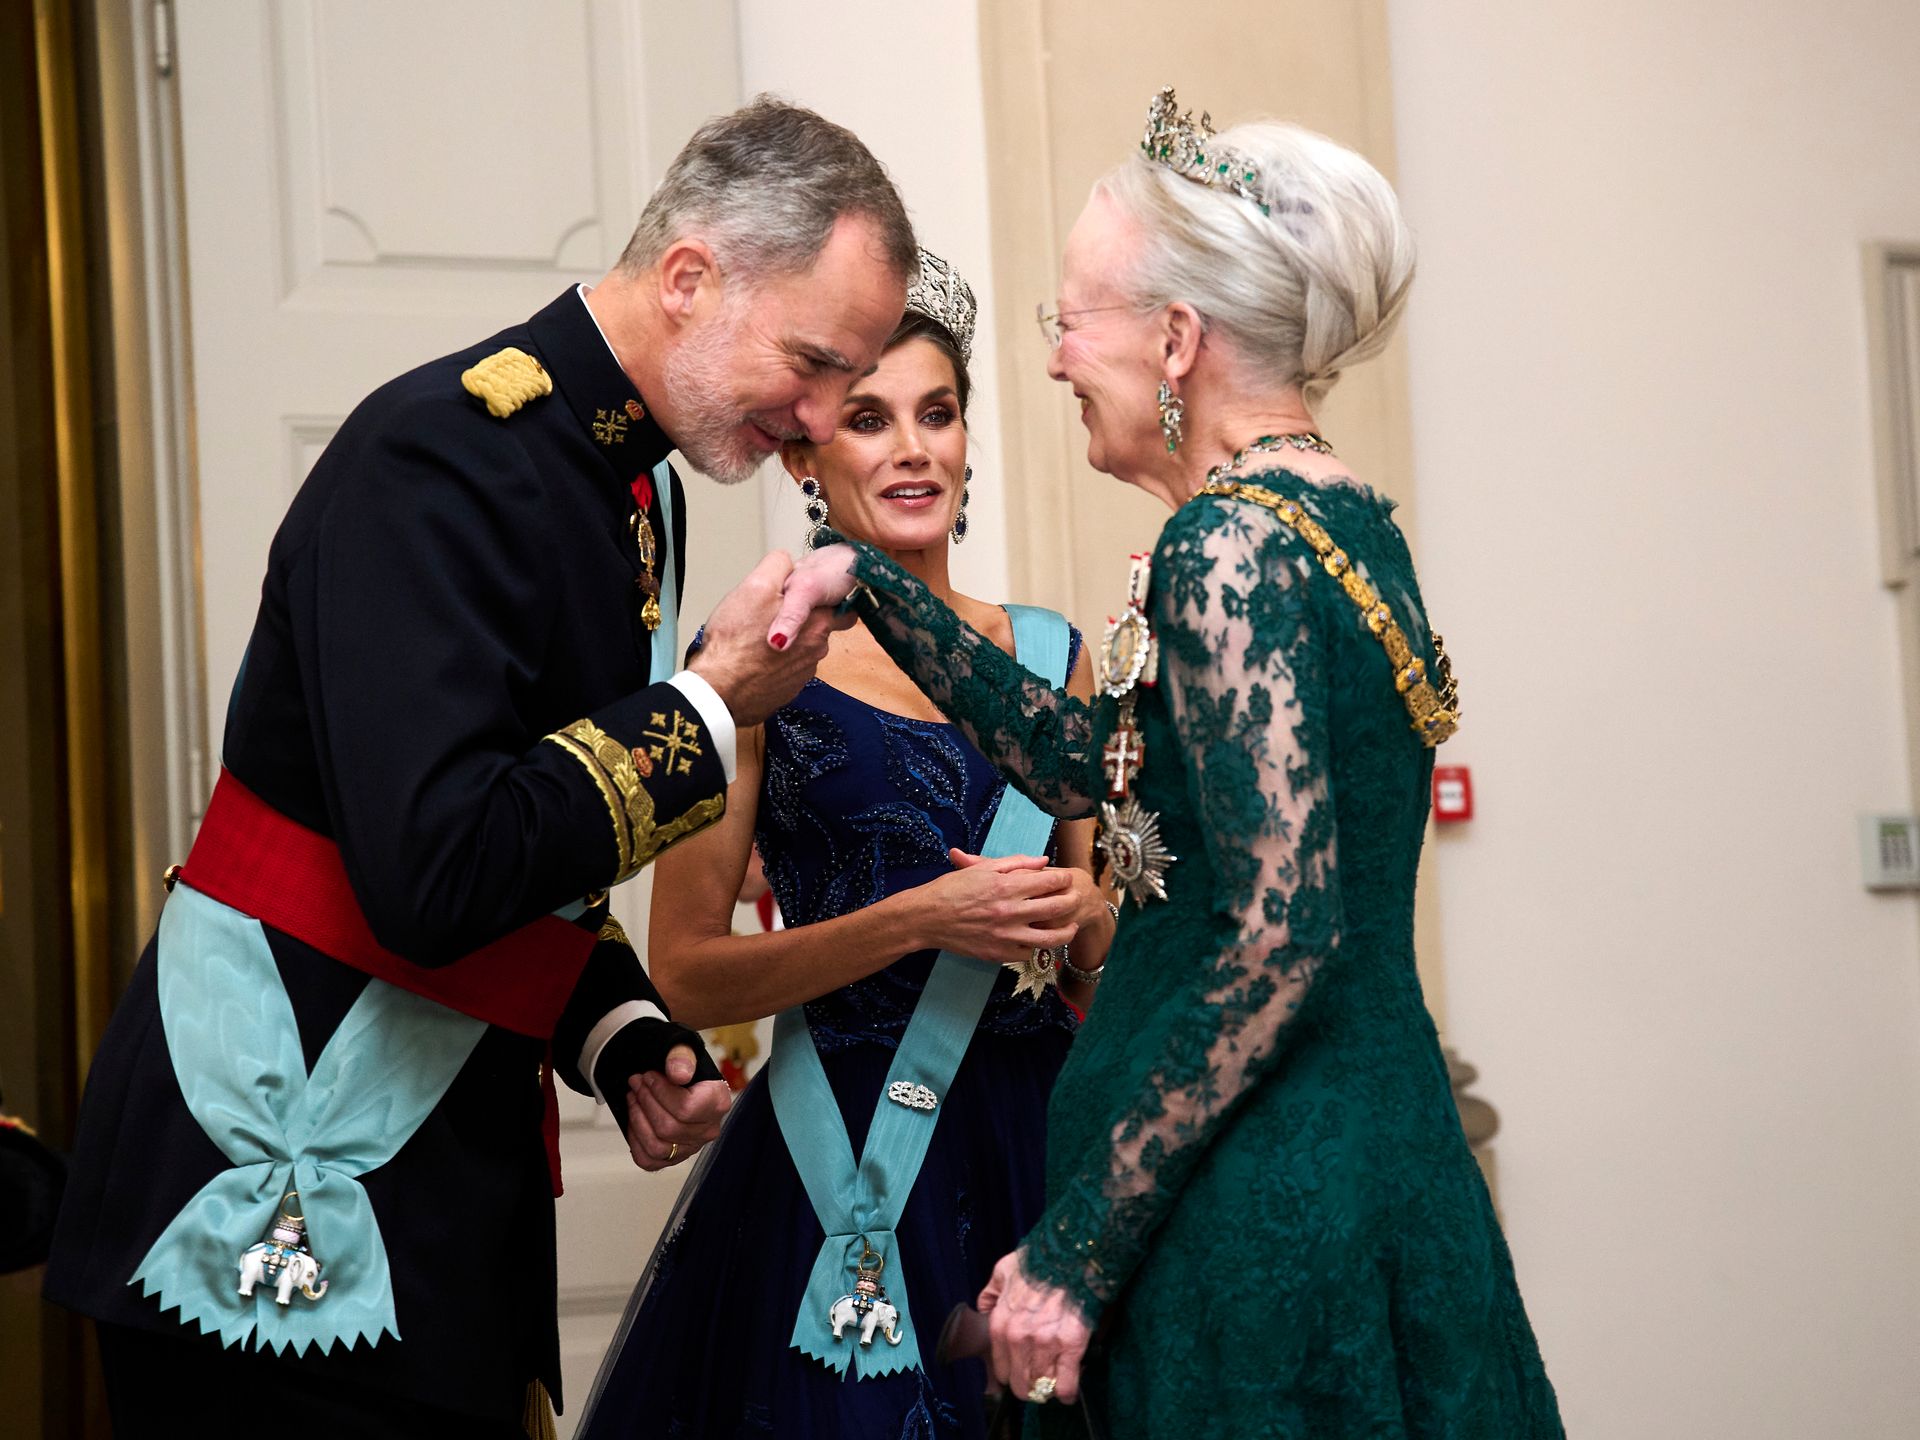 The King and #Queen of Spain Attend a Glittering Gala Dinner in Copenhagen!  Plus, More #Royal News! 